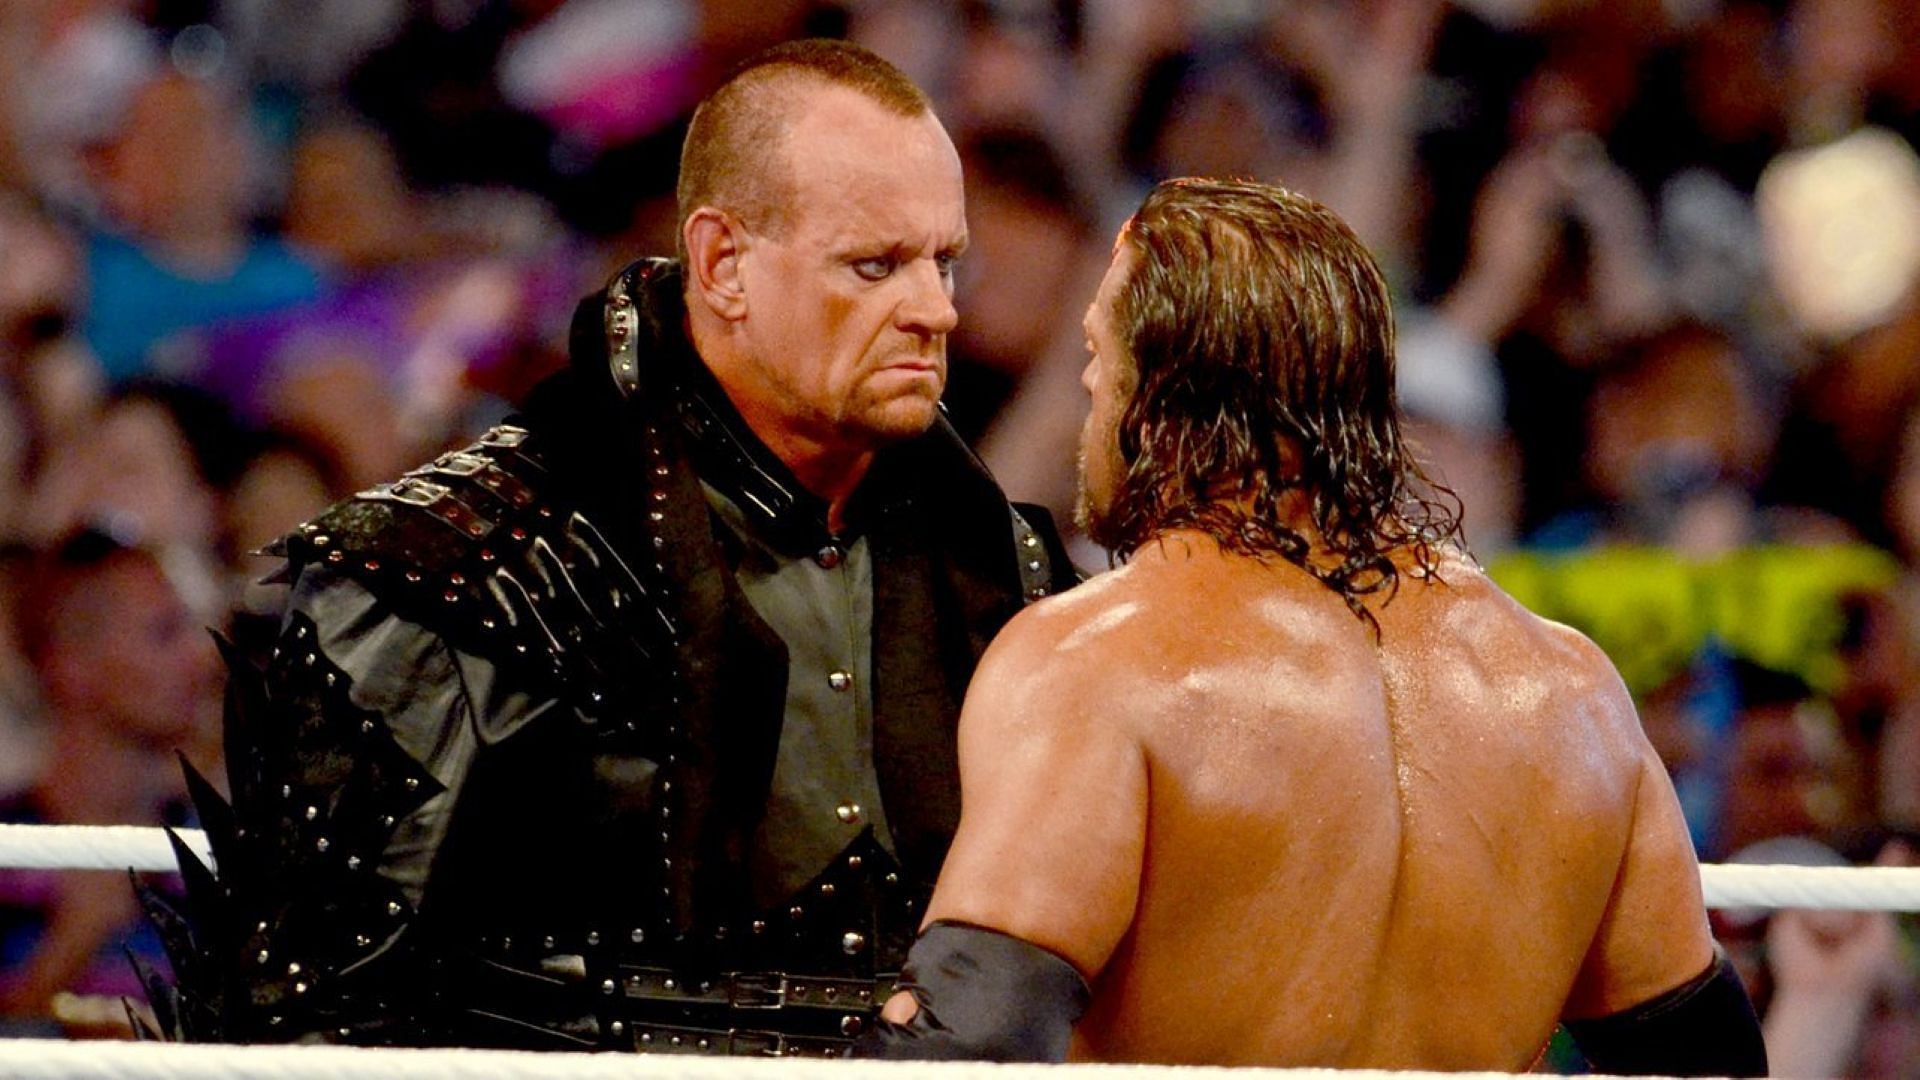 The Undertaker and Triple H face off in WWE ring